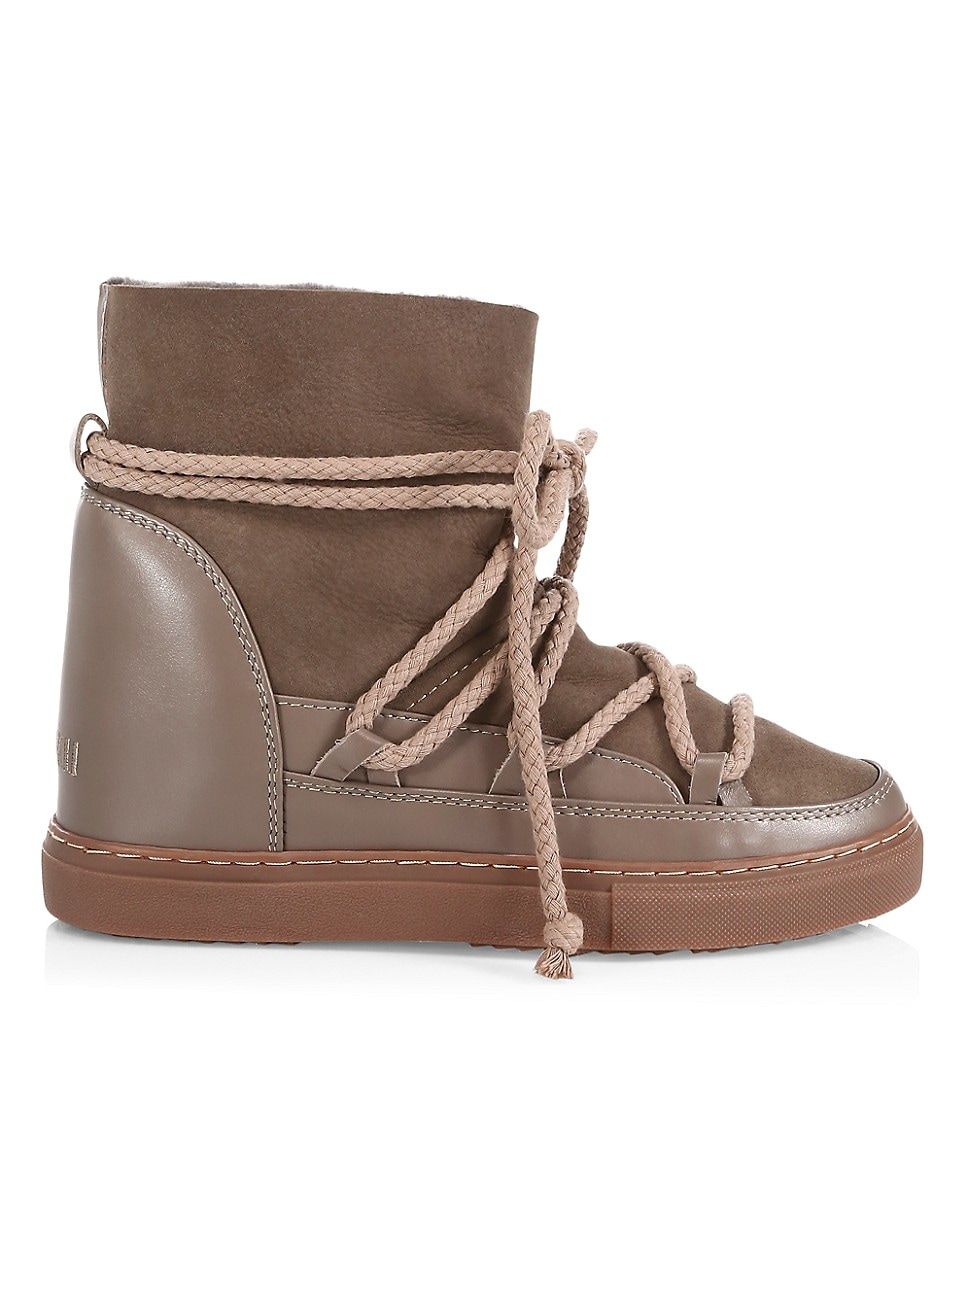 Women's Classic Leather Wedge Sneaker Boots - Taupe - Size 6 | Saks Fifth Avenue